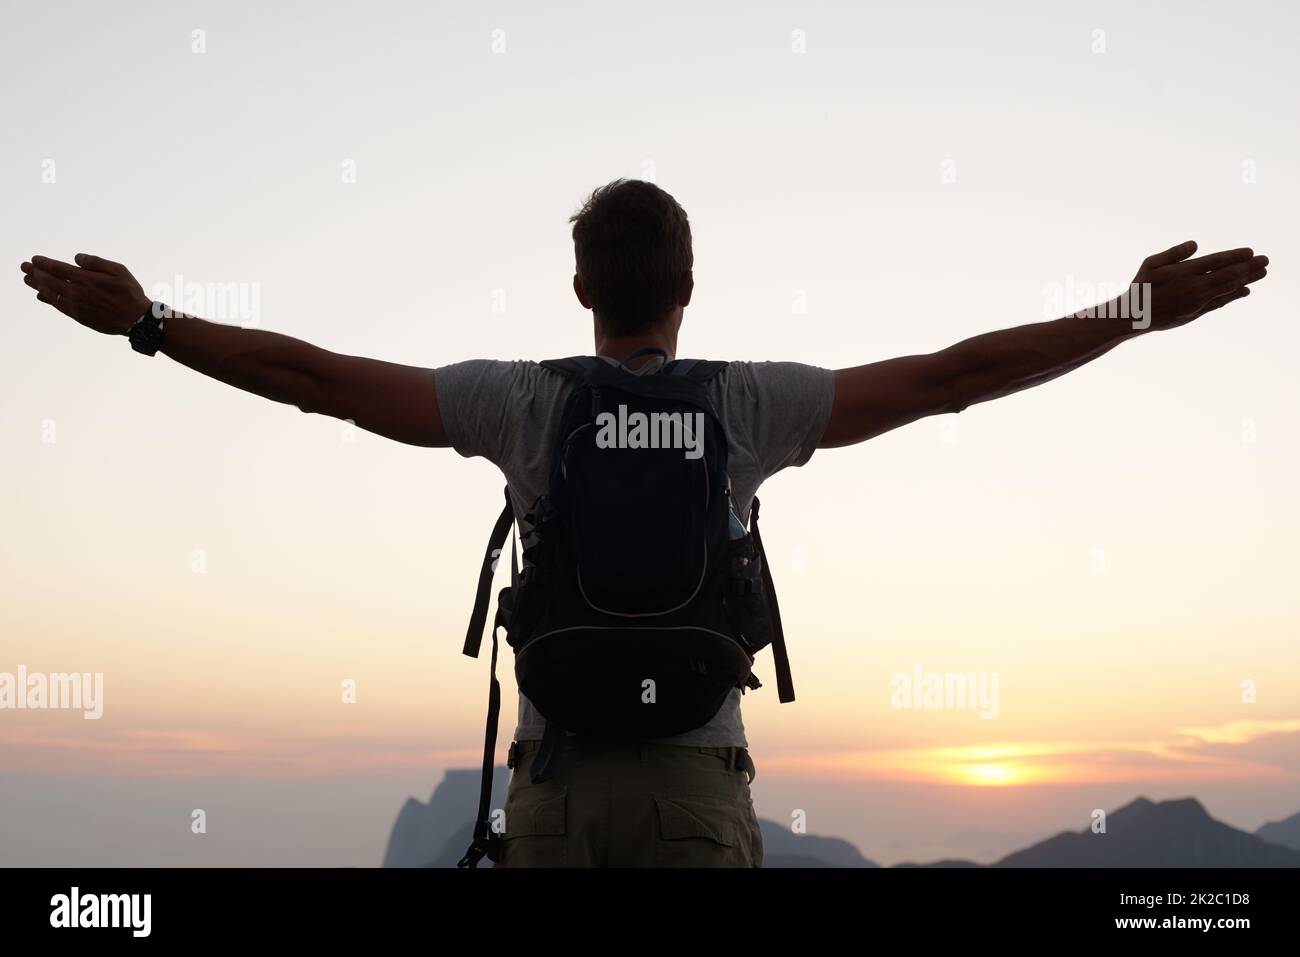 Finding his place in the world. Silhouette shot of a young man standing against the sky. Stock Photo